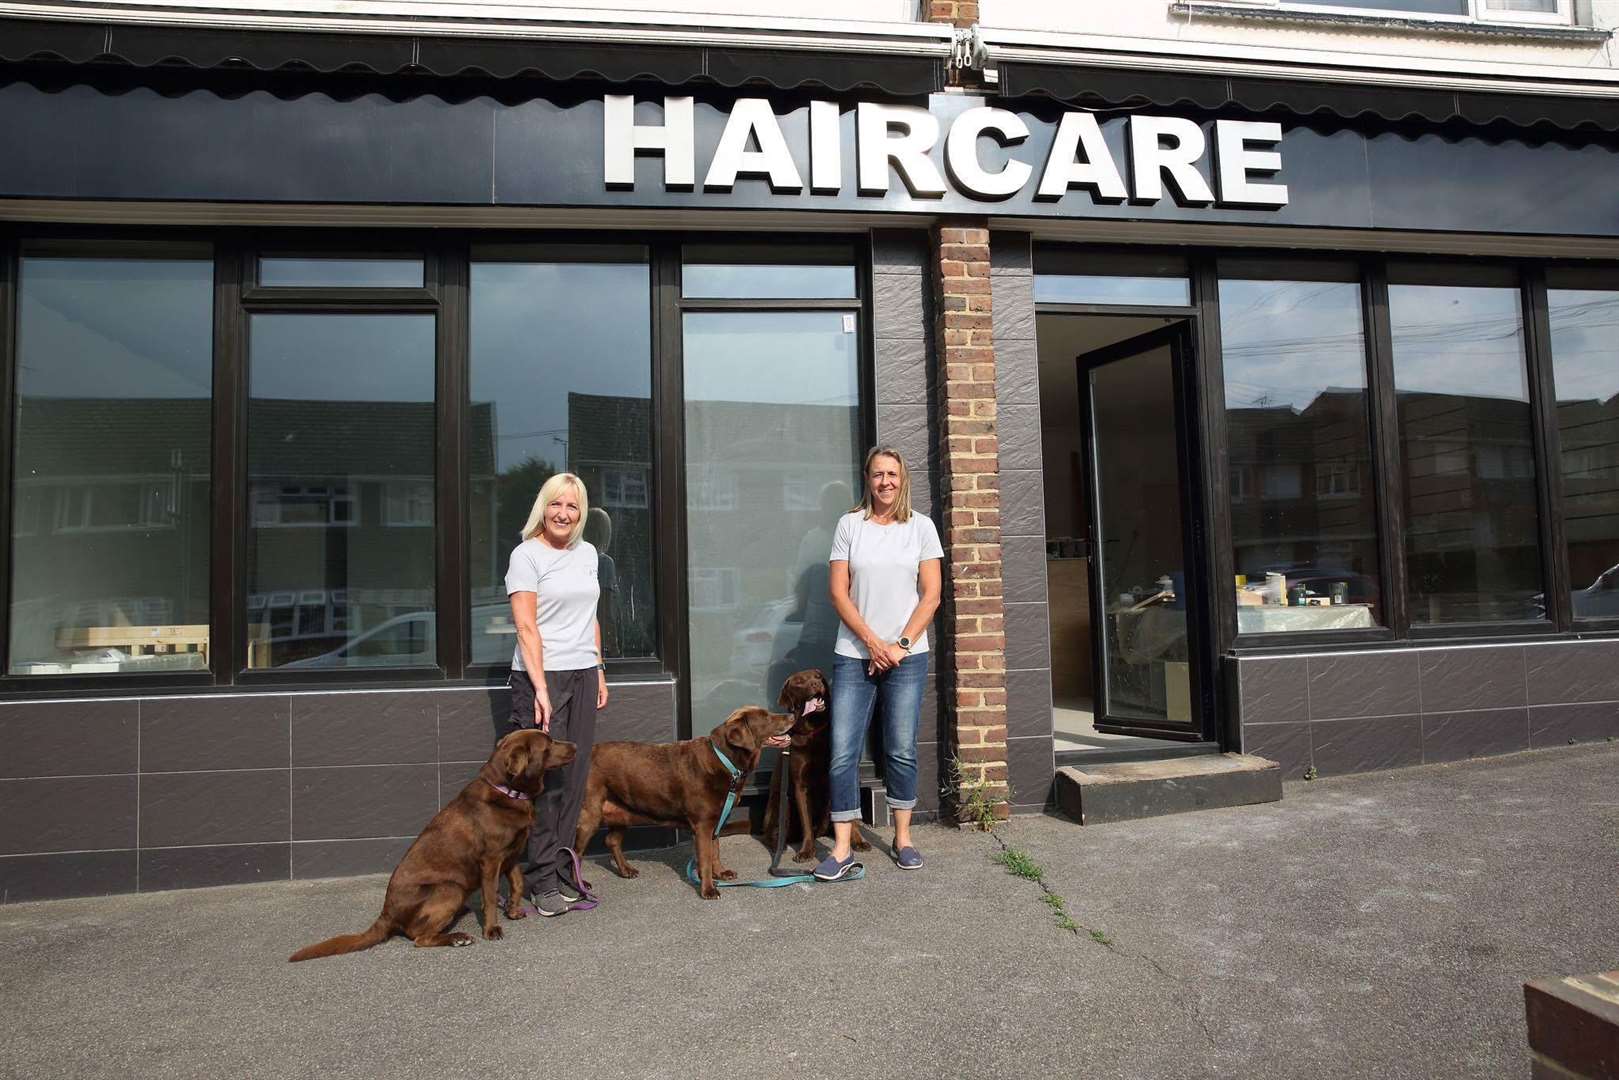 The store will be opened in the former Hair Care salon. Picture: Happy Tails